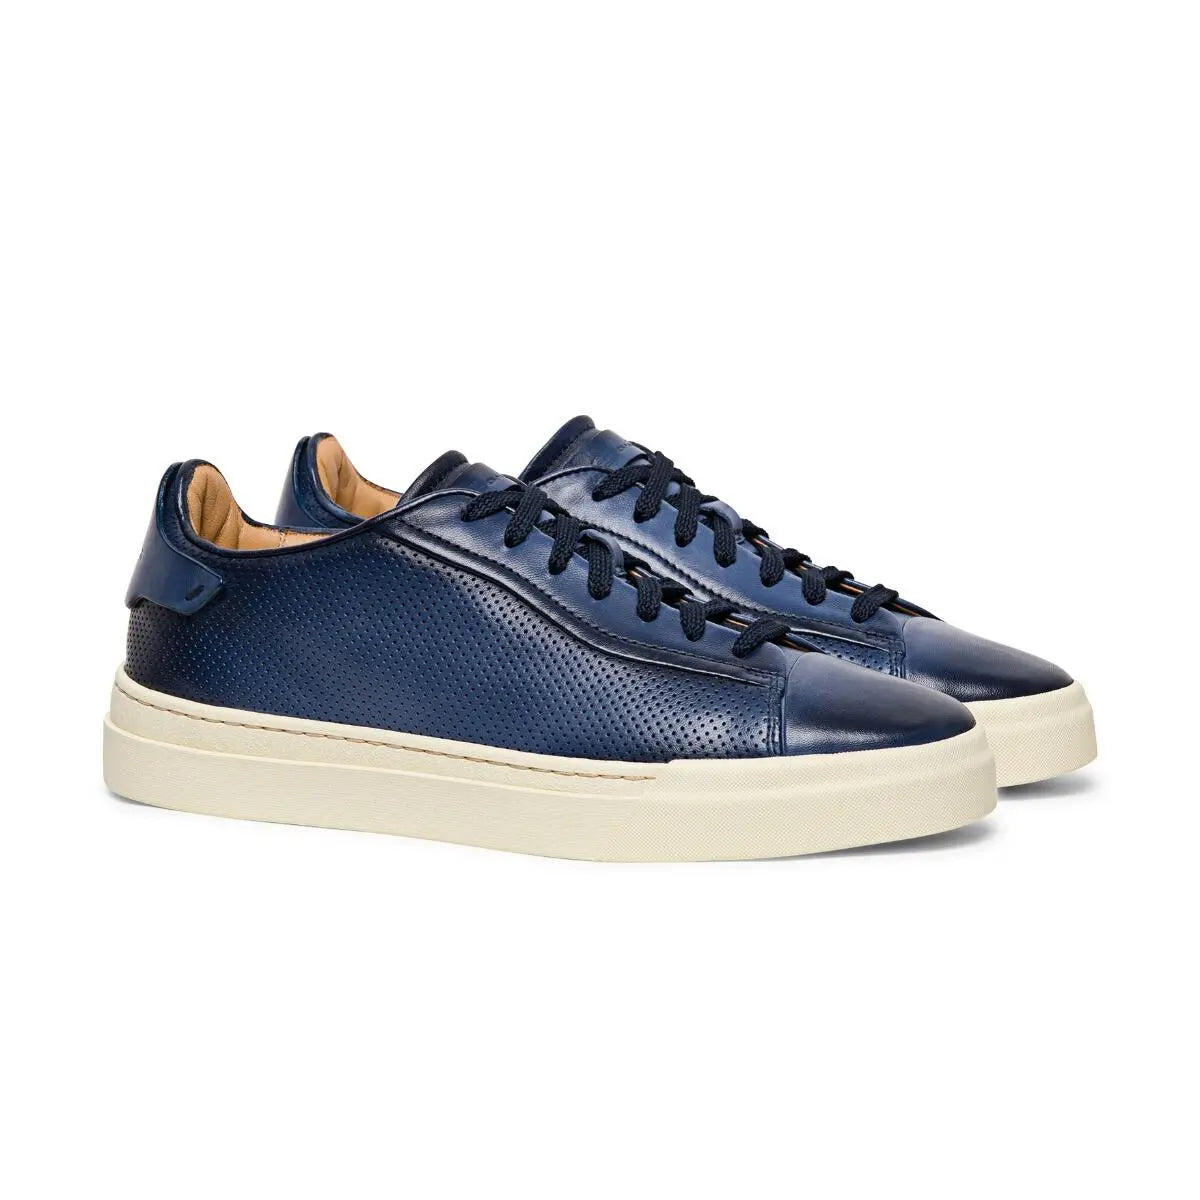 Blue Distressed Perforated Effect Leather Sneaker  Santoni   